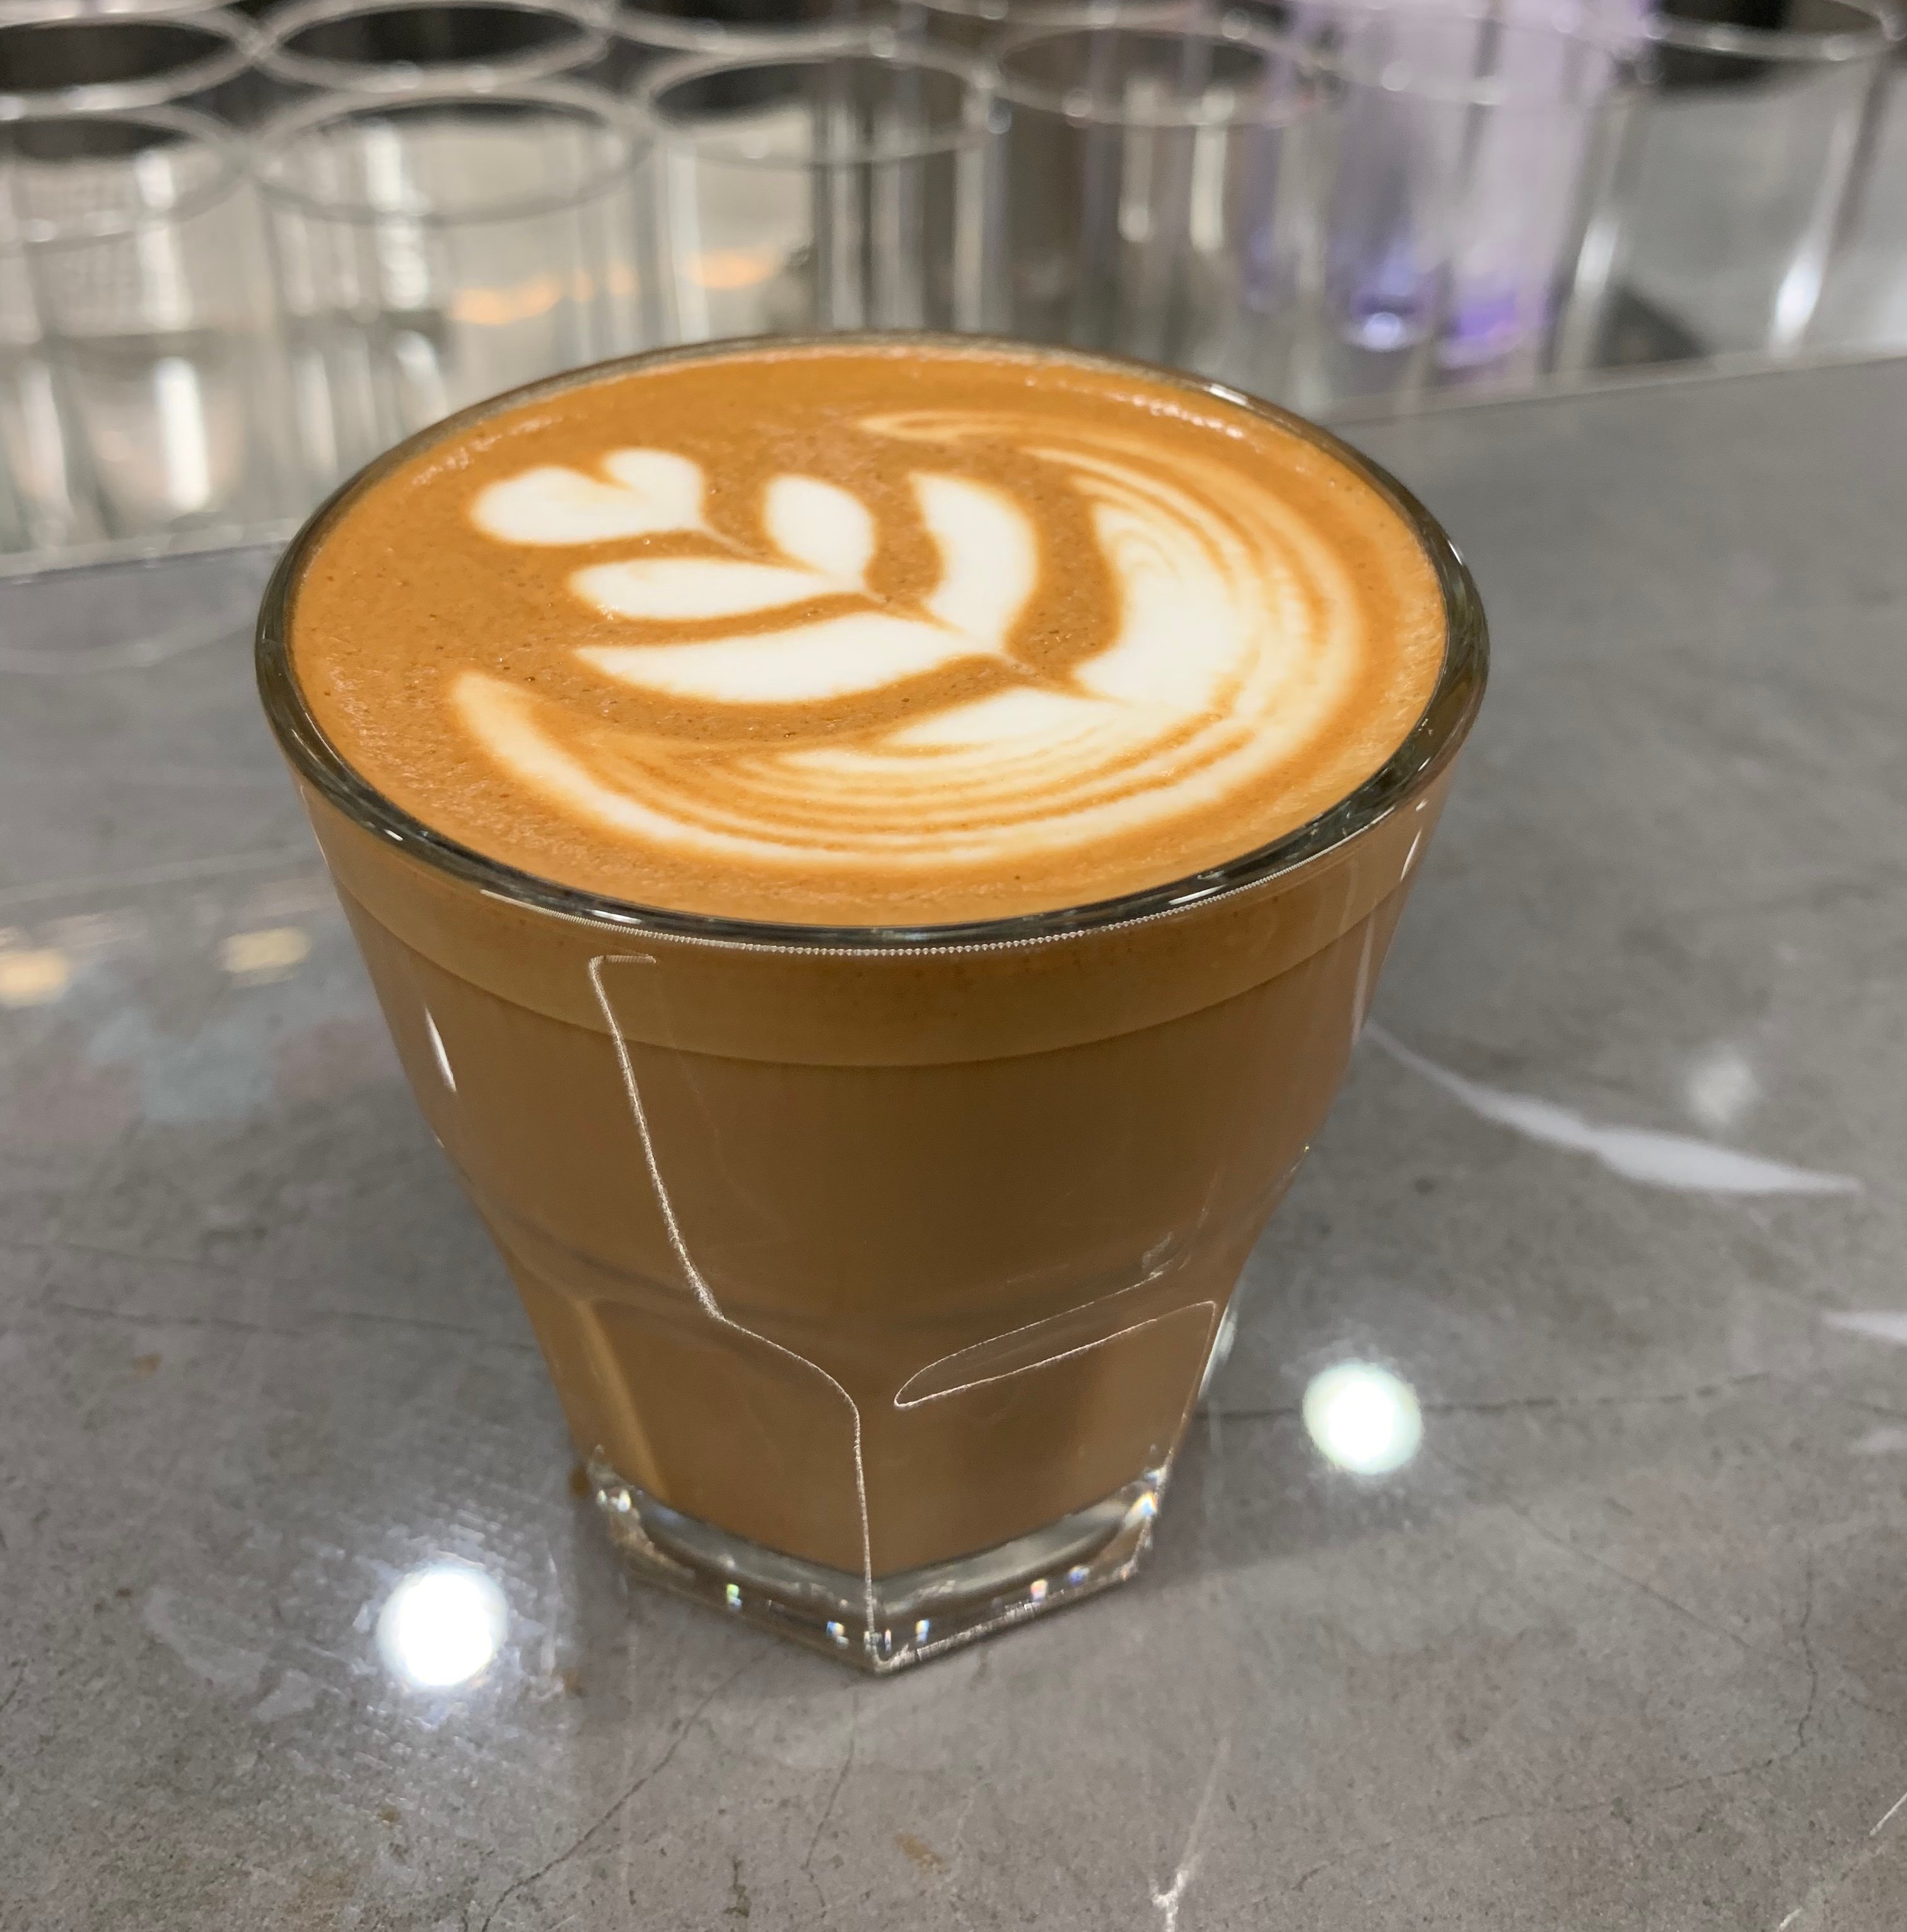 Cortado from Tim Hortons' innovation café, served in a reusable glass on a shiny grey countertop.